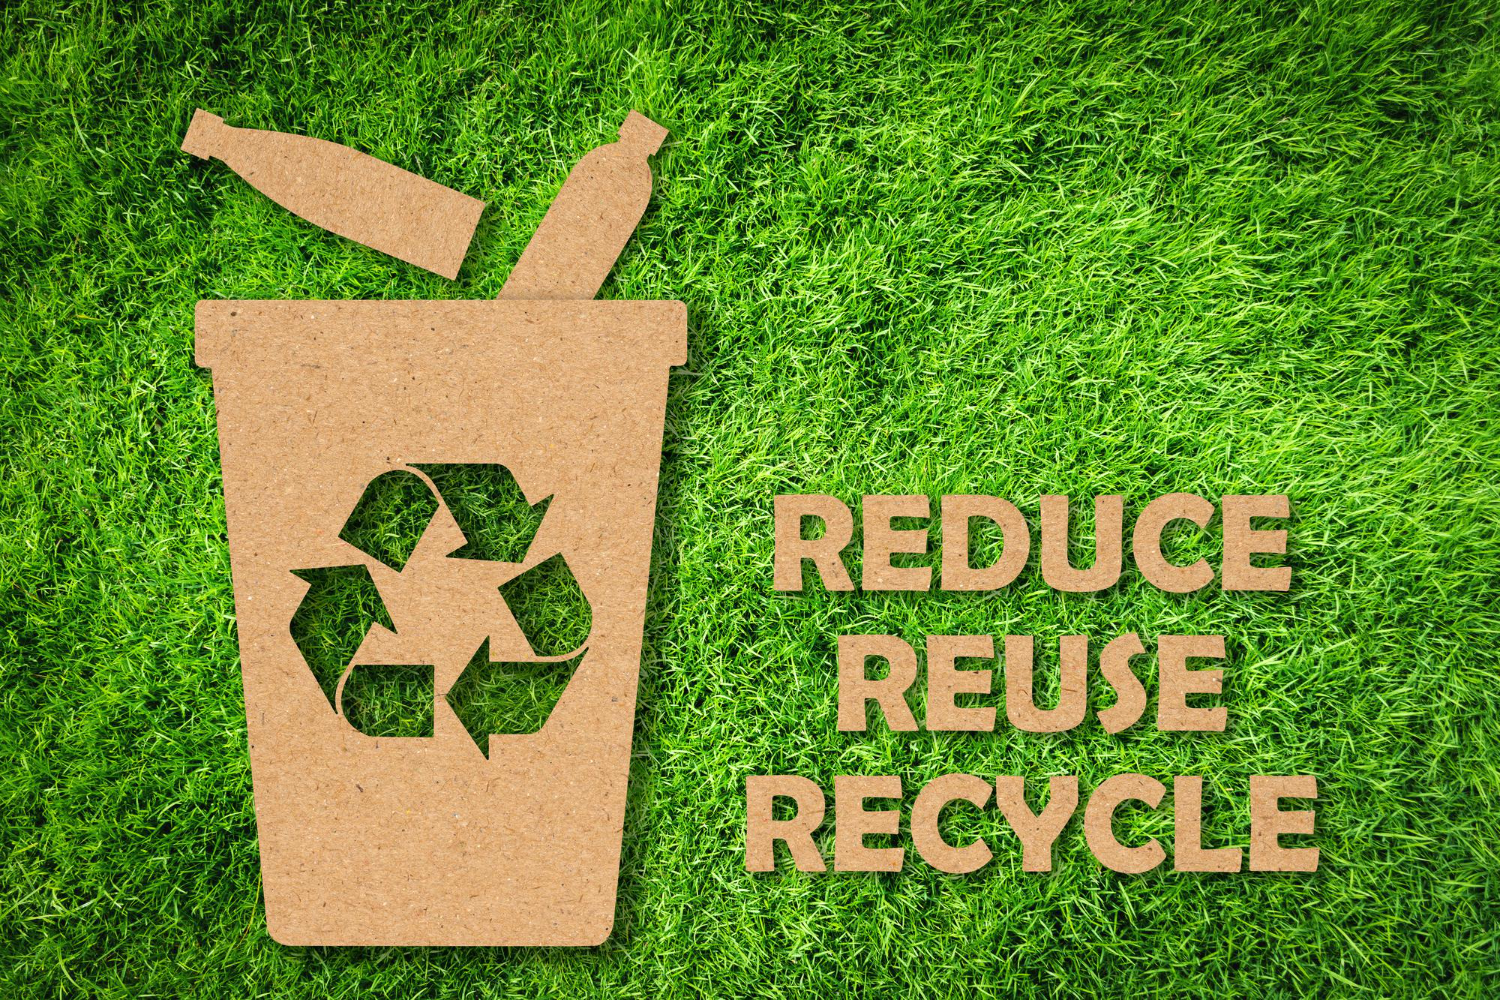 Kraft-paper-cut-reuse-reduce-recycle-symbol-text-green-grass-background-environmental-conservation-concept